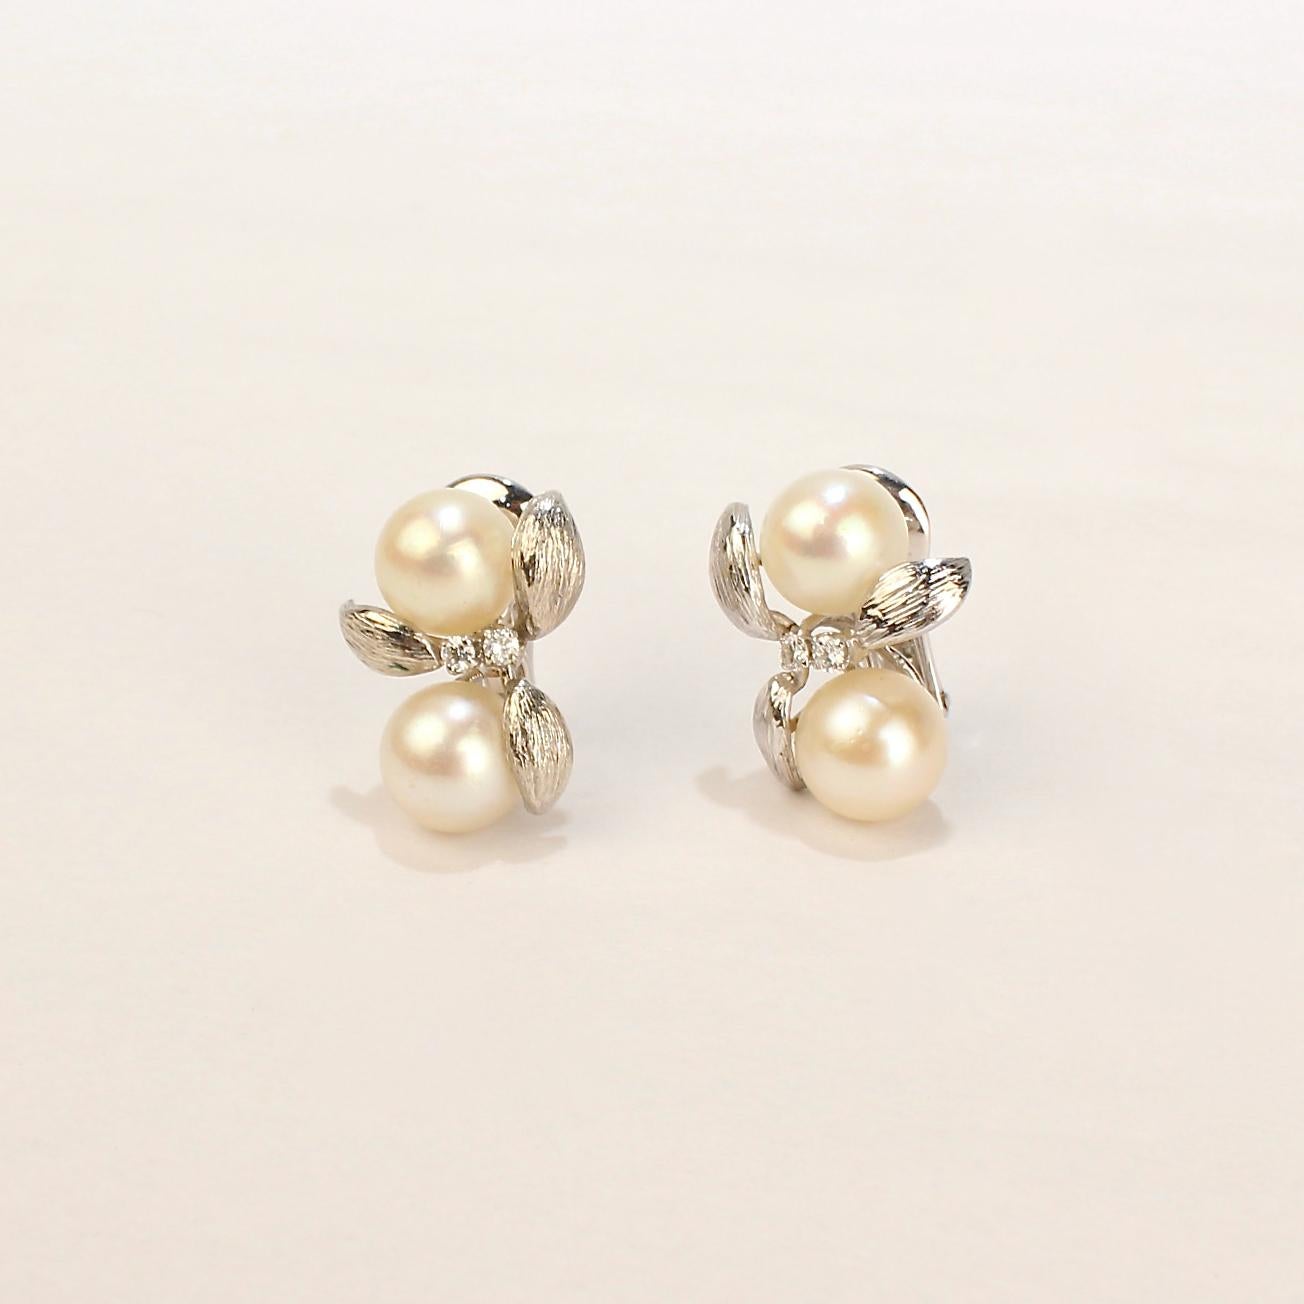 A very fine pair of David Webb clip-on earrings in 14k white gold.

Each earring with textured, stylized leaves, two ca. 9 mm round white pearls, and two small round brilliant cut accent diamonds. 

Together with the original leather pouch stamped